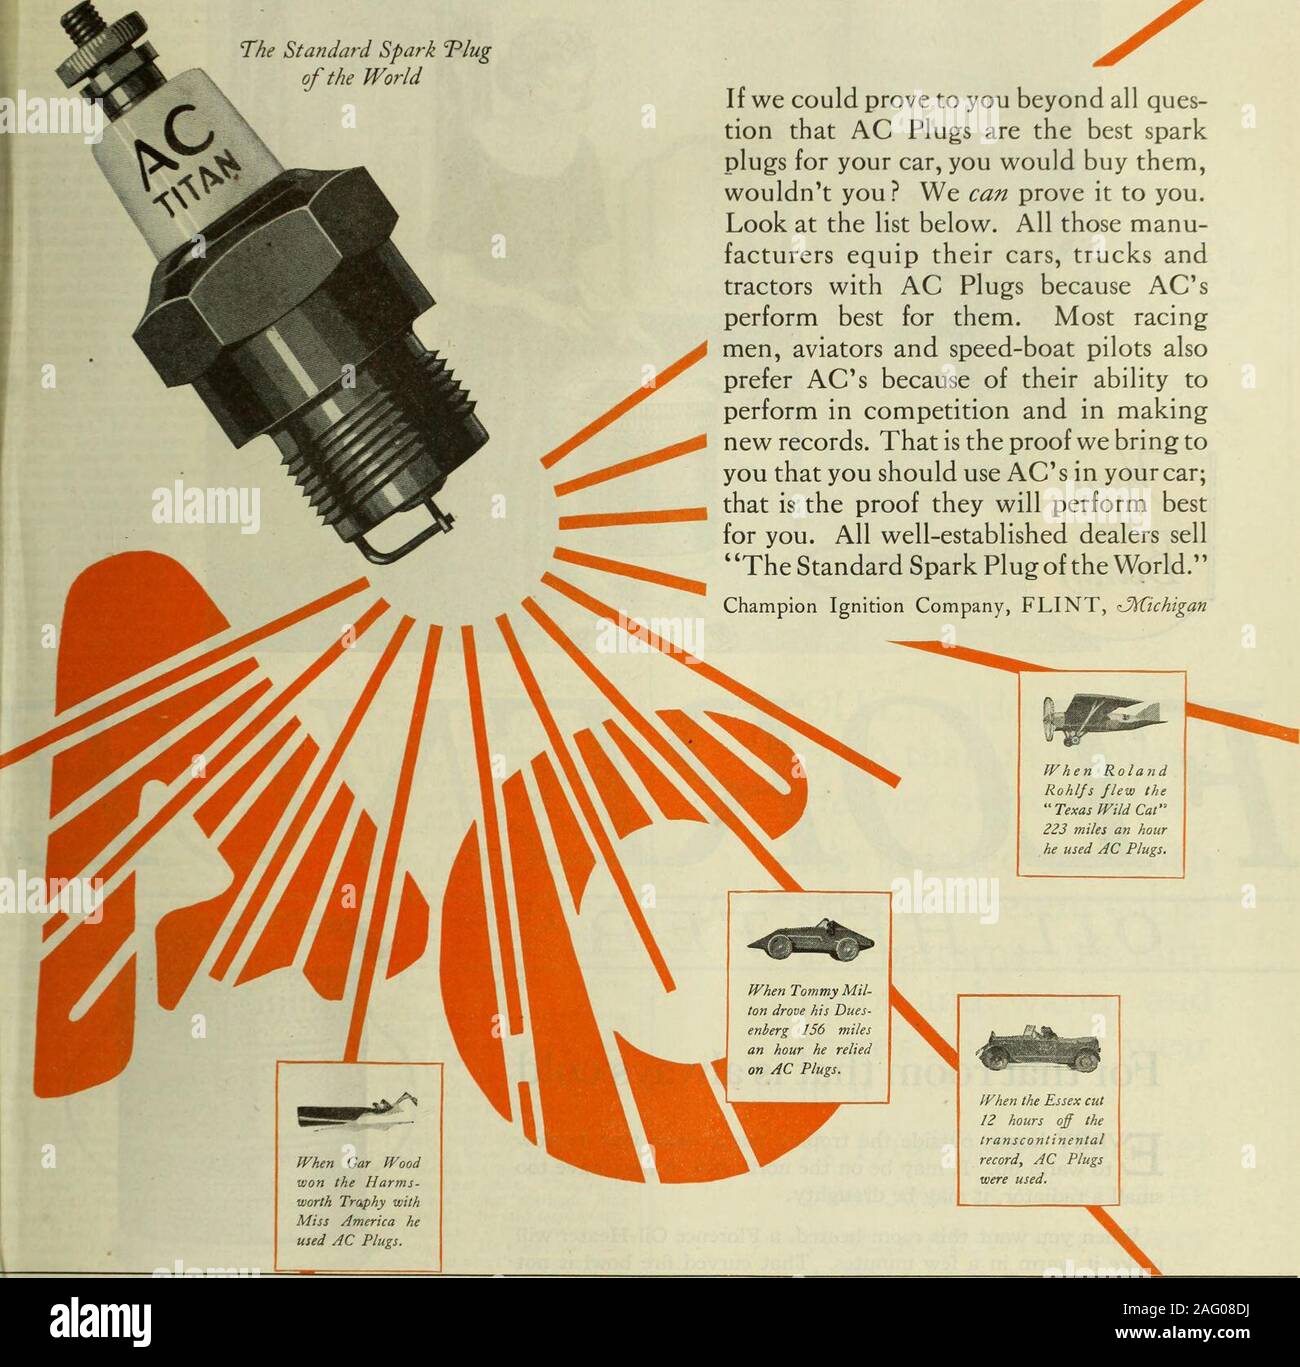 The Saturday evening post. If we could prove to you beyond all ques-tion  that AC Plugs are the best sparkplugs for your car, you would buy  them,wouldnt you? We can prove